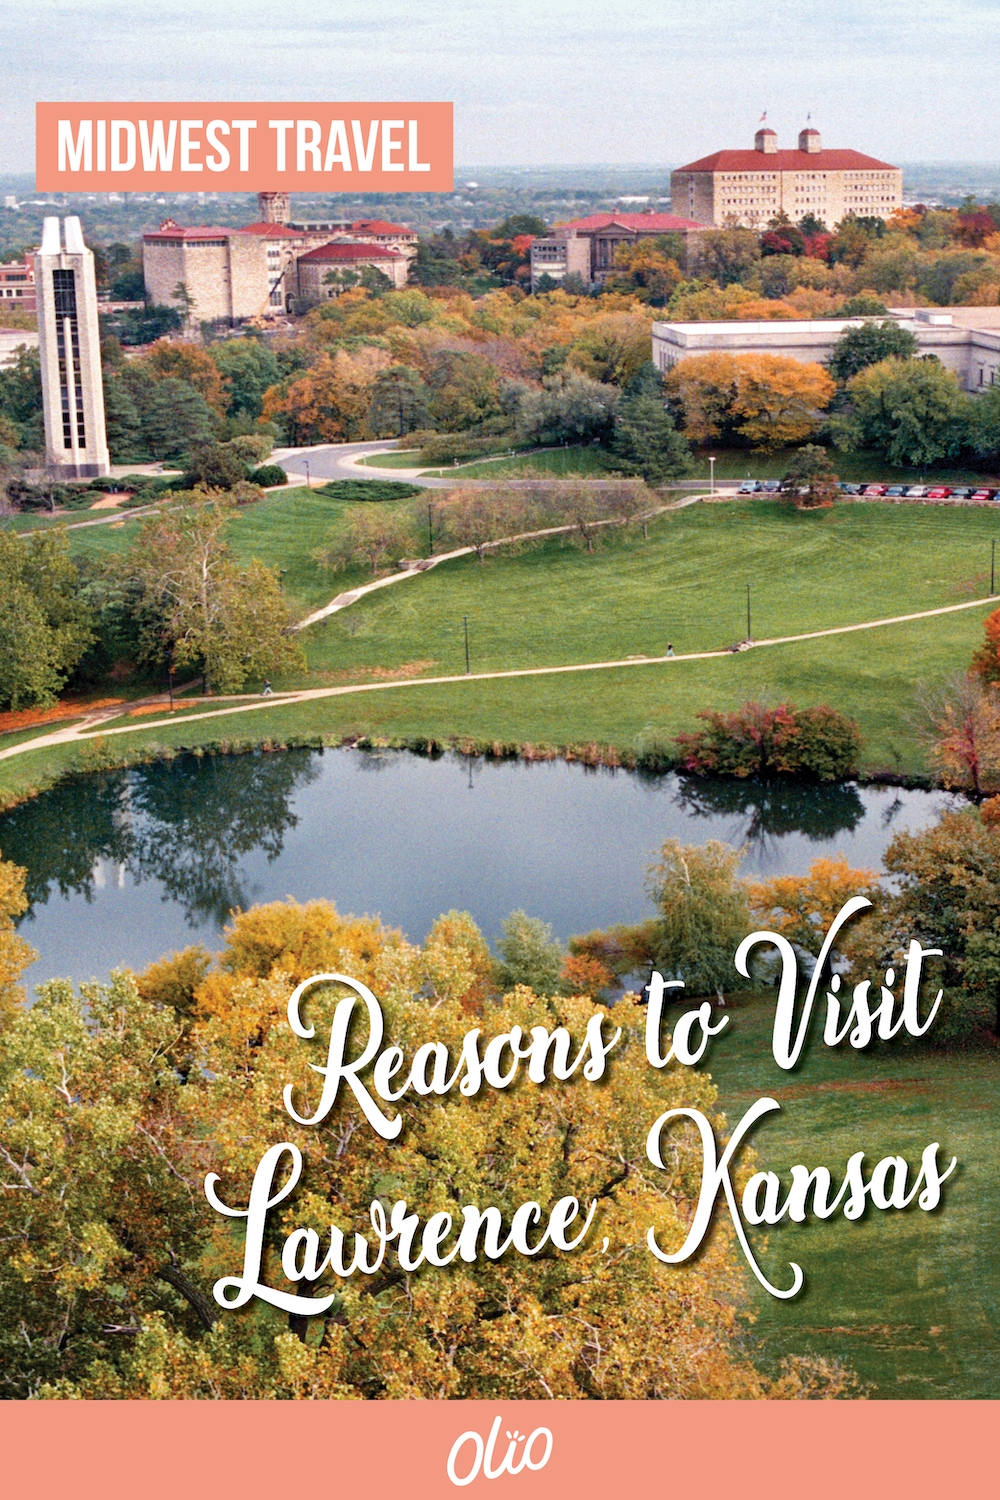 From incredible eateries and history-making breweries to a vibrant arts and culture scene, there are lots of reasons to fall in love with Lawrence, Kansas. Plan a weekend getaway to learn why Lawrence is more than your typical college town. #Kansas #Lawrence #Midwest #MidwestTravel